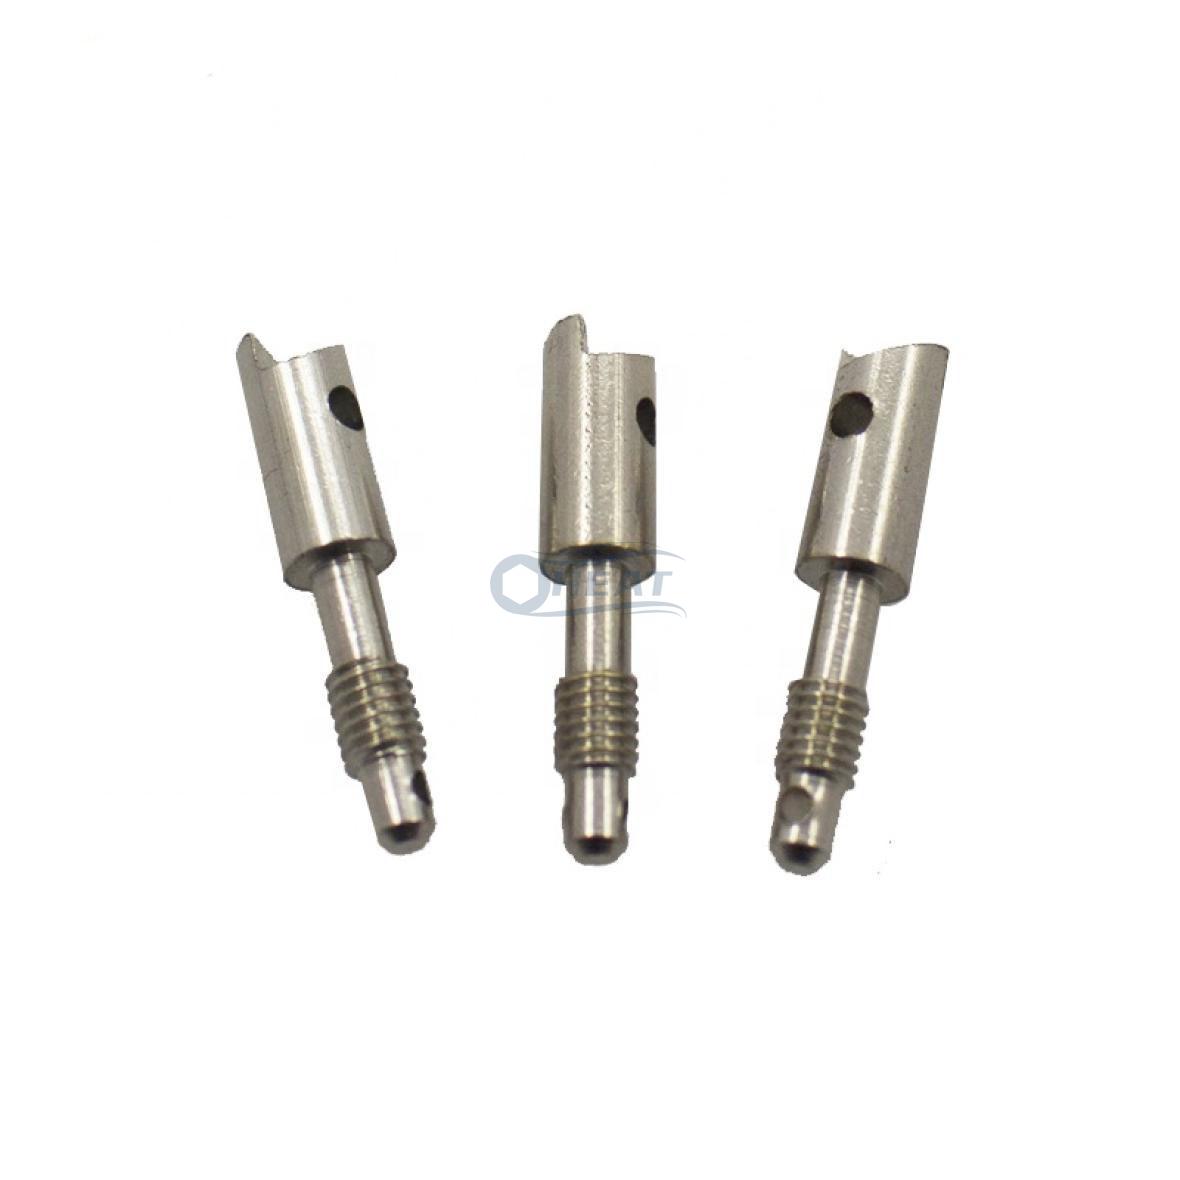 Special Custom Security Sealing Screw nickel plated for electric parts 